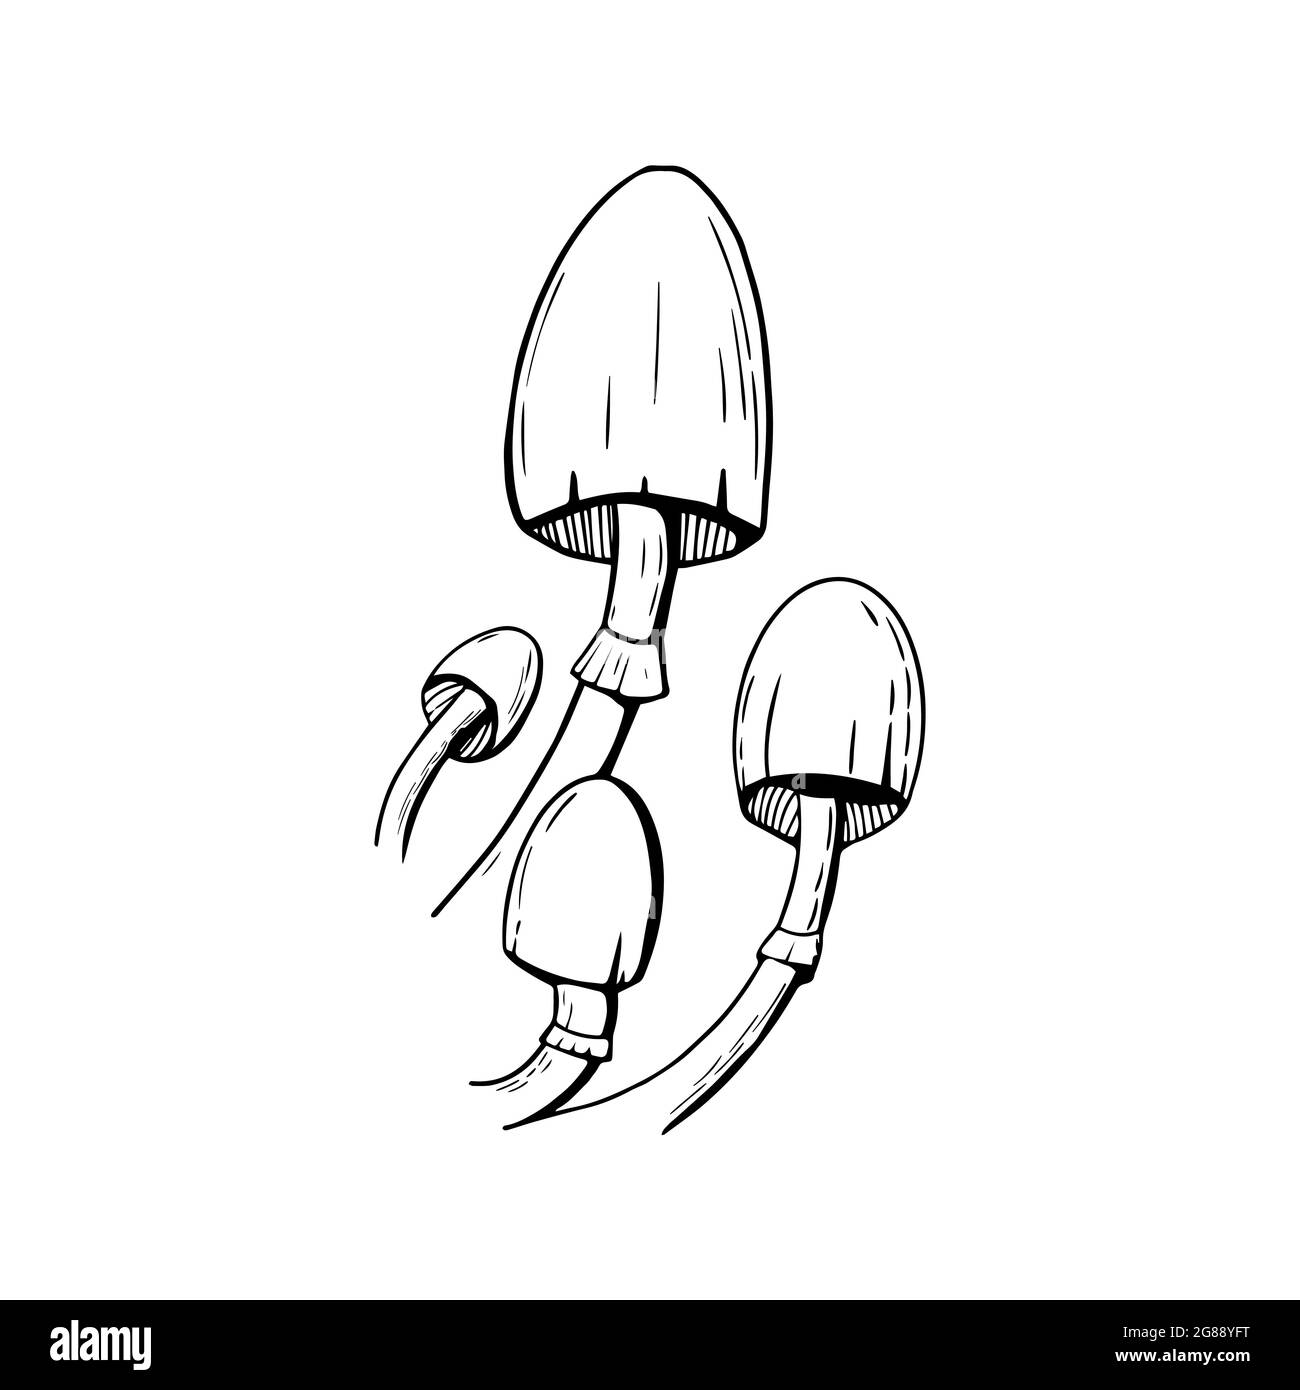 Toxic mushroom doodles on a white. Halloween design elements. Stock Vector